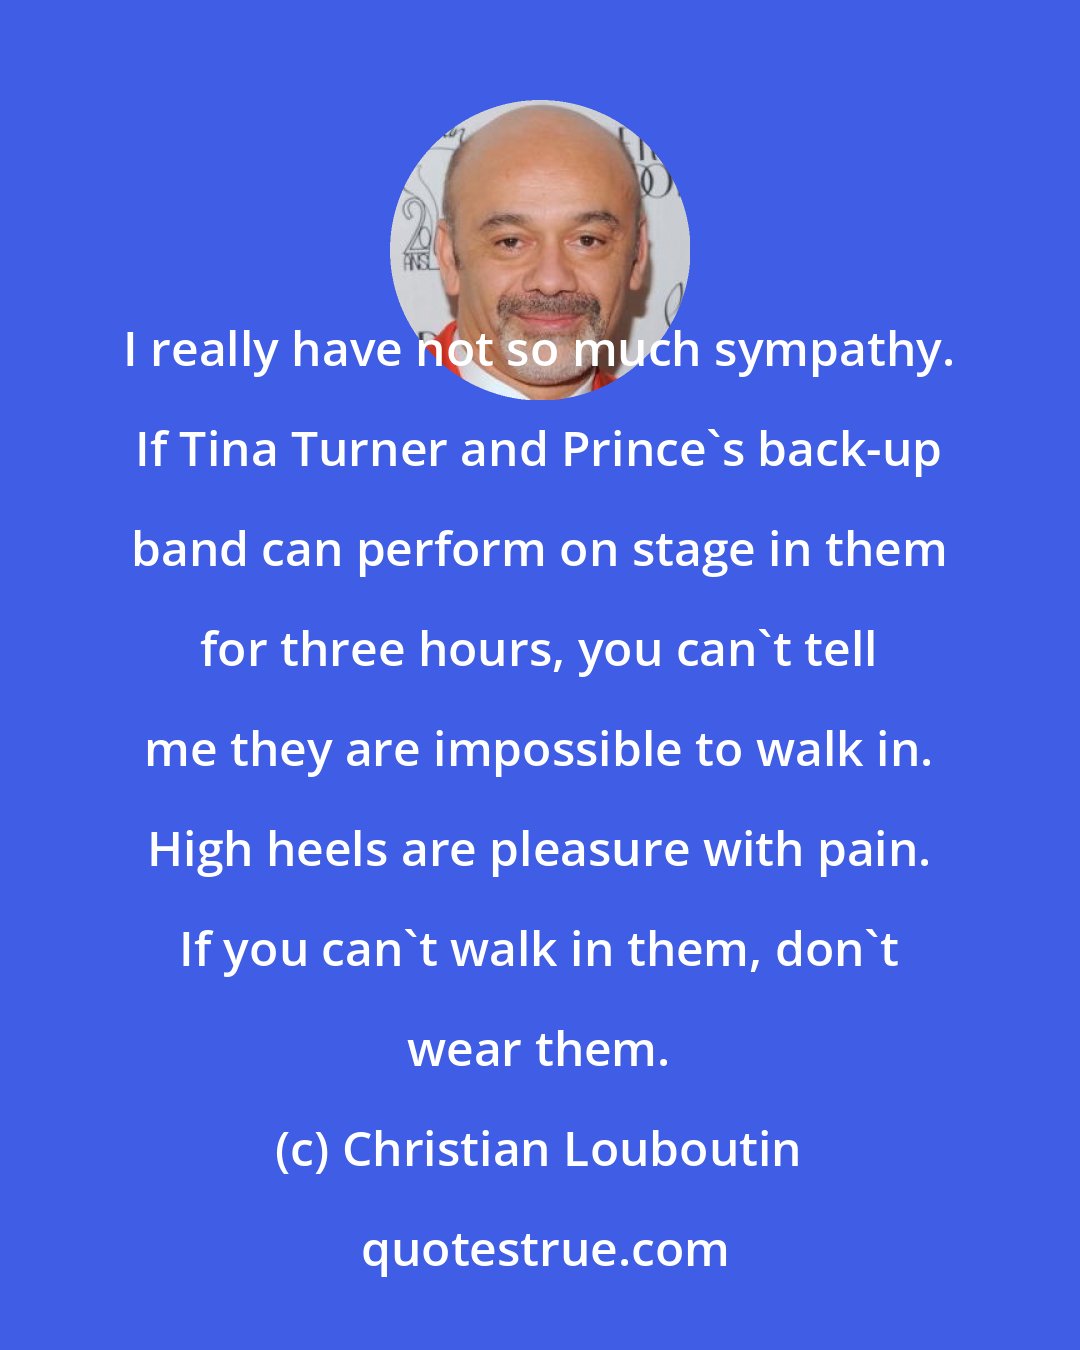 Christian Louboutin: I really have not so much sympathy. If Tina Turner and Prince's back-up band can perform on stage in them for three hours, you can't tell me they are impossible to walk in. High heels are pleasure with pain. If you can't walk in them, don't wear them.